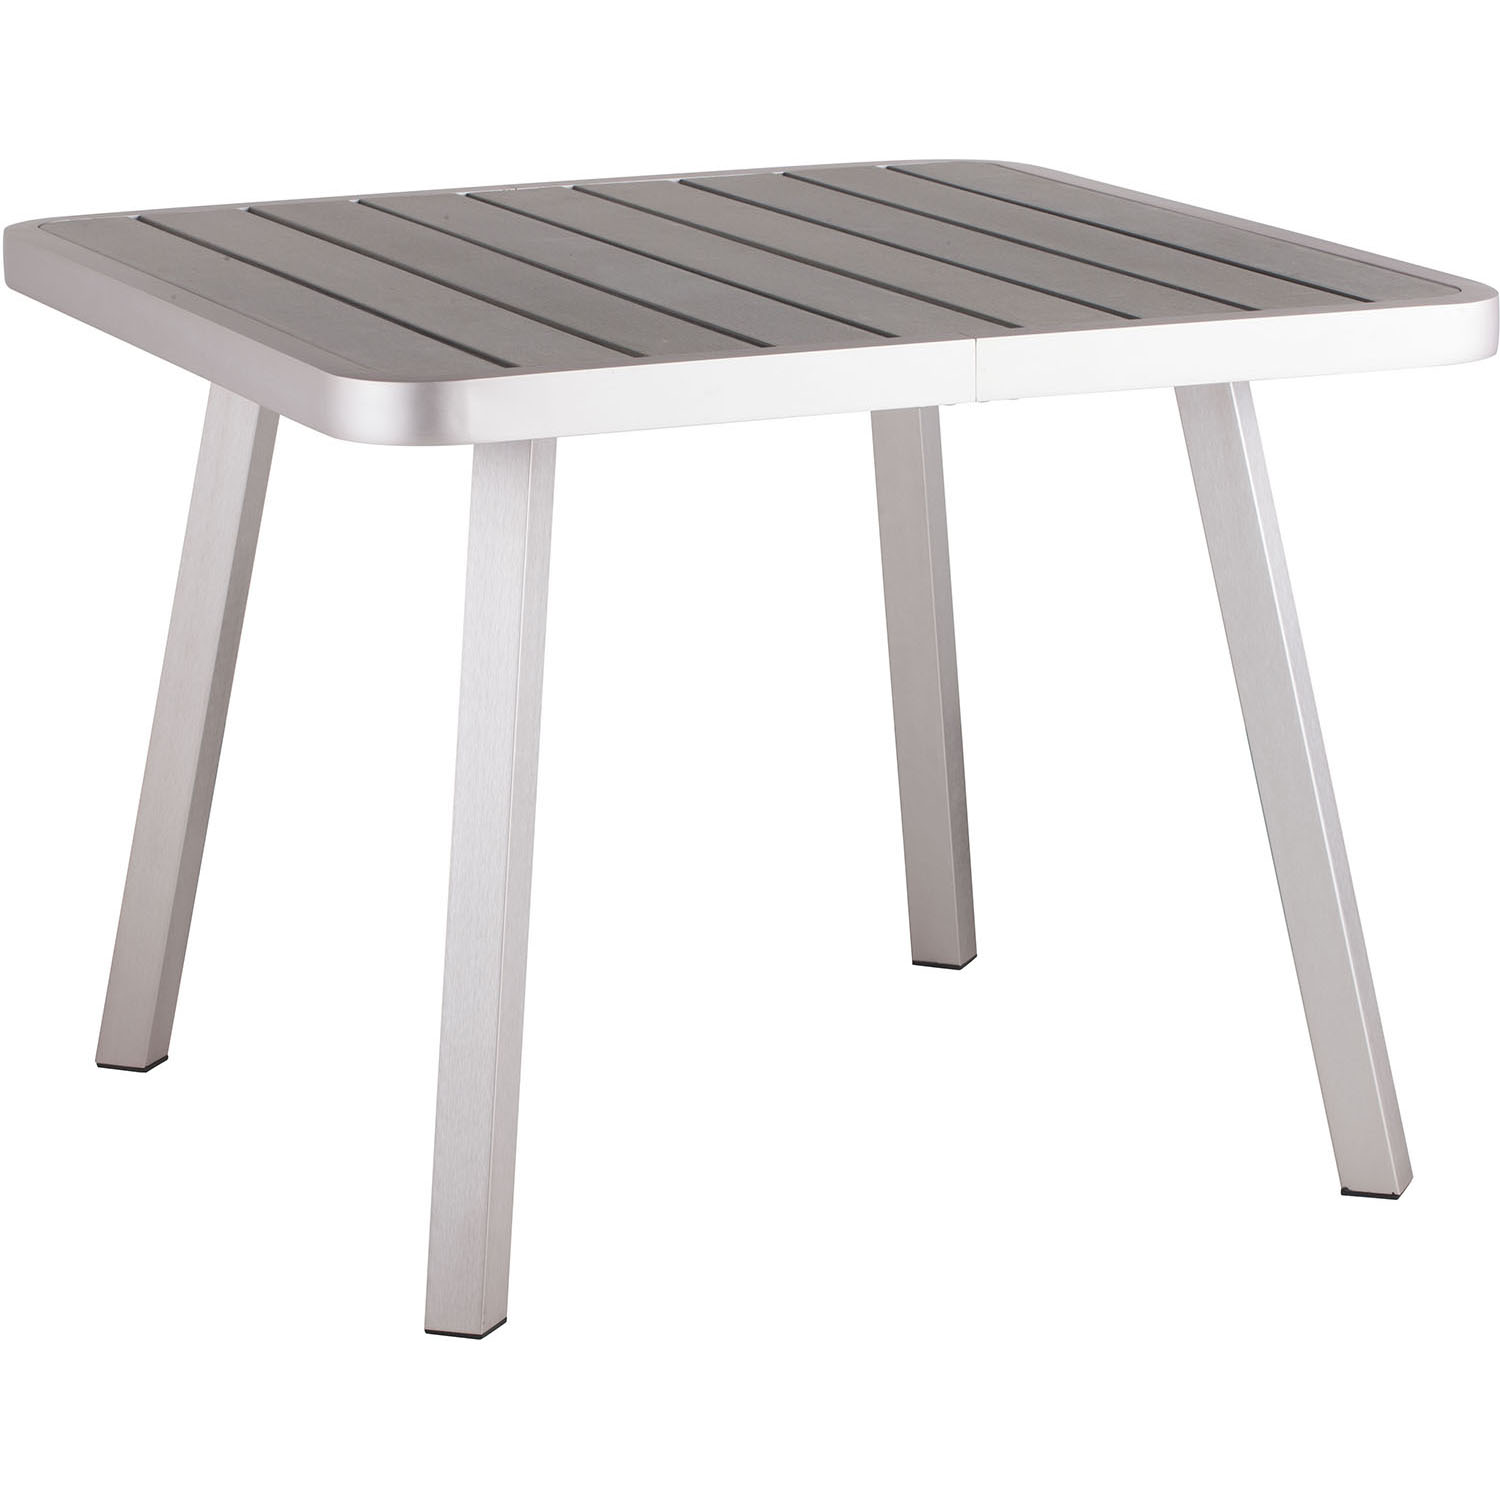 Outdoor Township Dining Square Table: Brushed Aluminum Frame Finish